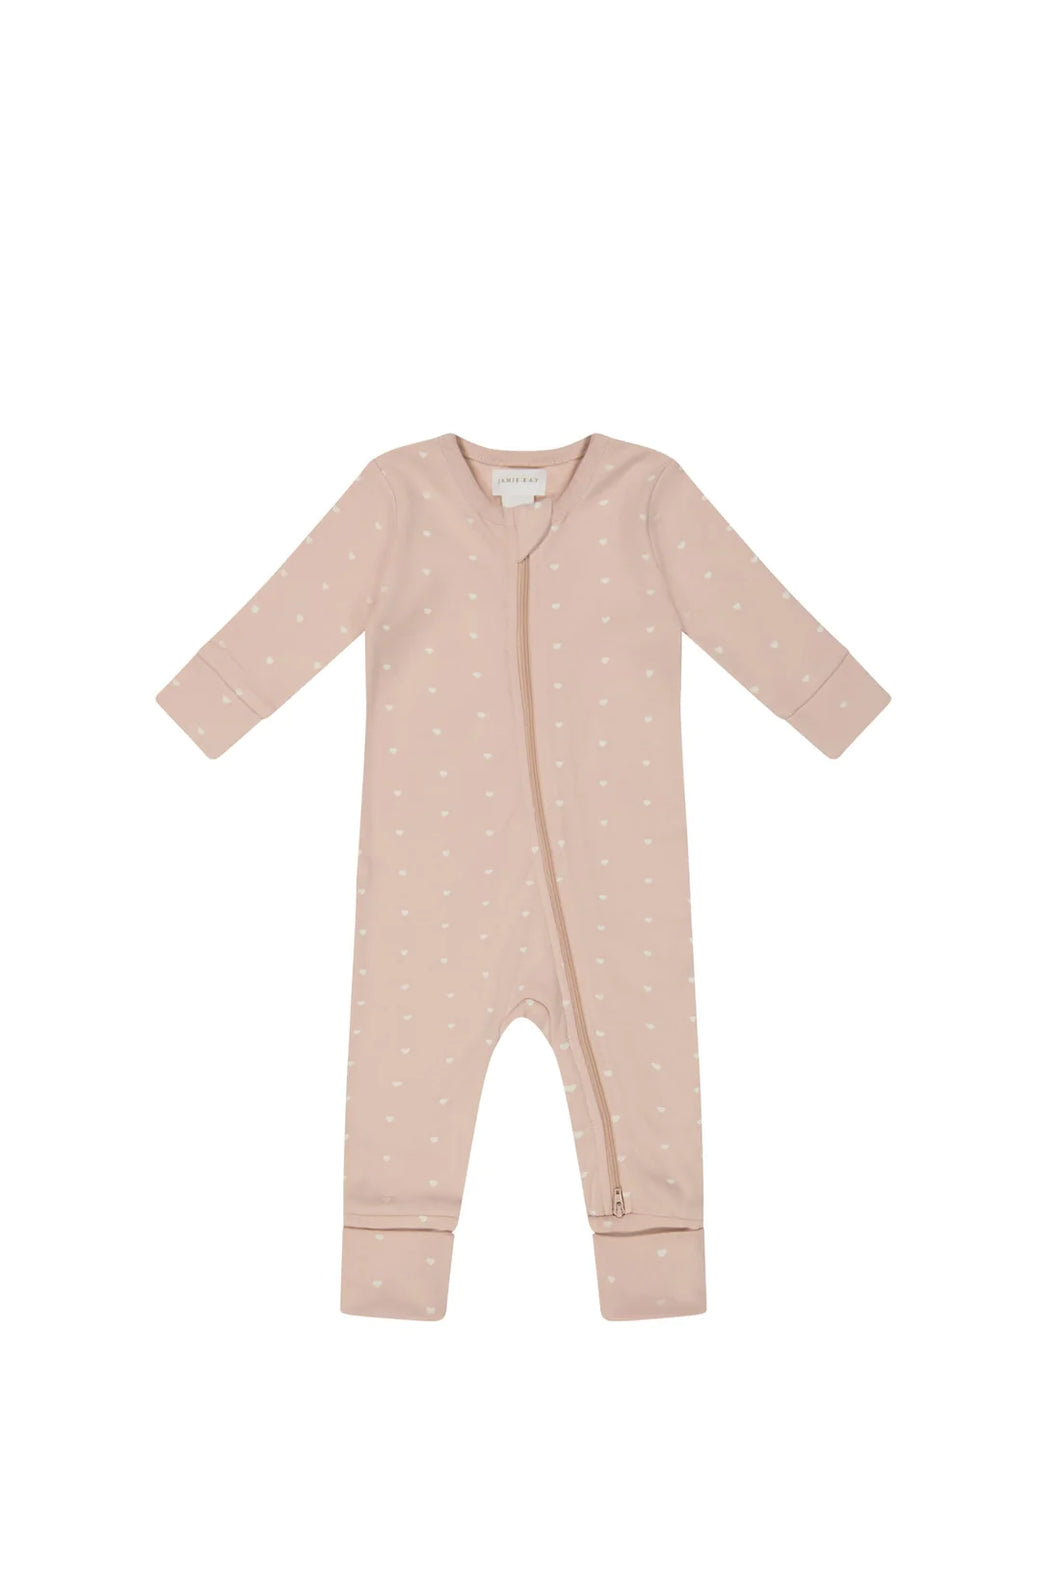 Organic Cotton Gracelyn Onepiece - Mon Amour Rose